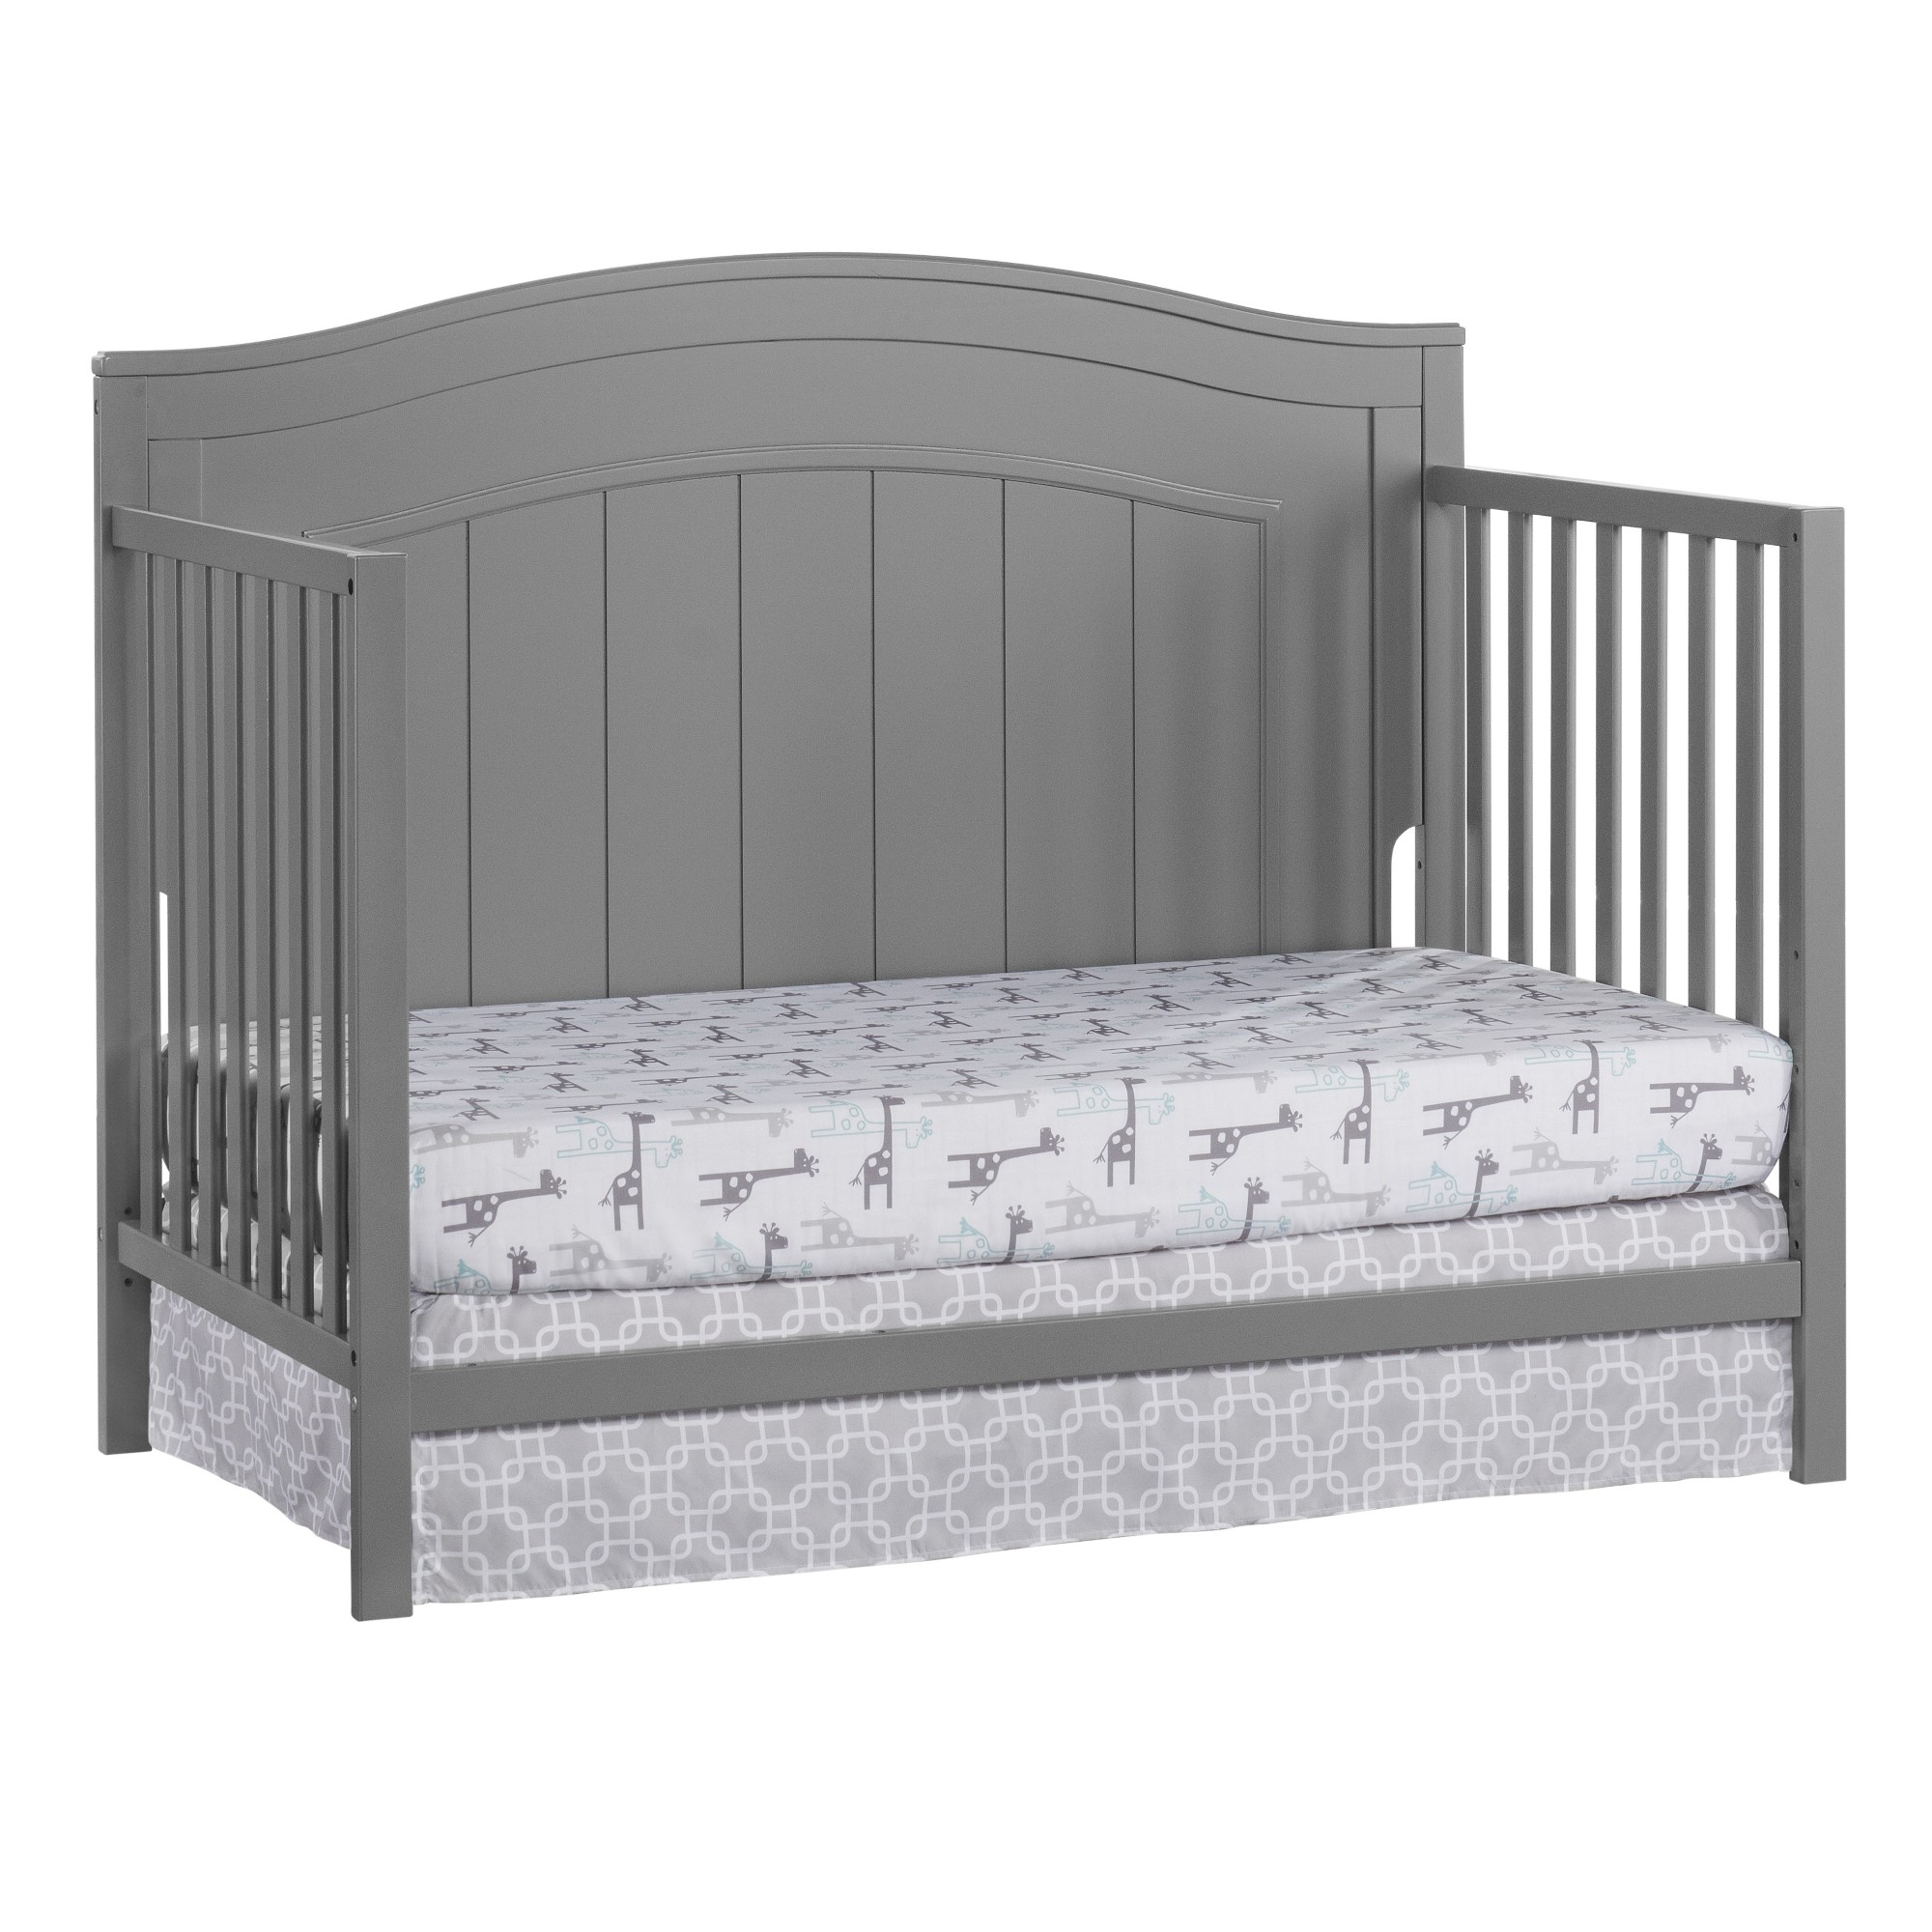 Oxford Baby North Bay 4-in-1 Convertible Crib, Dove Gray, GREENGUARD Gold Certified, Wooden Crib - image 3 of 12